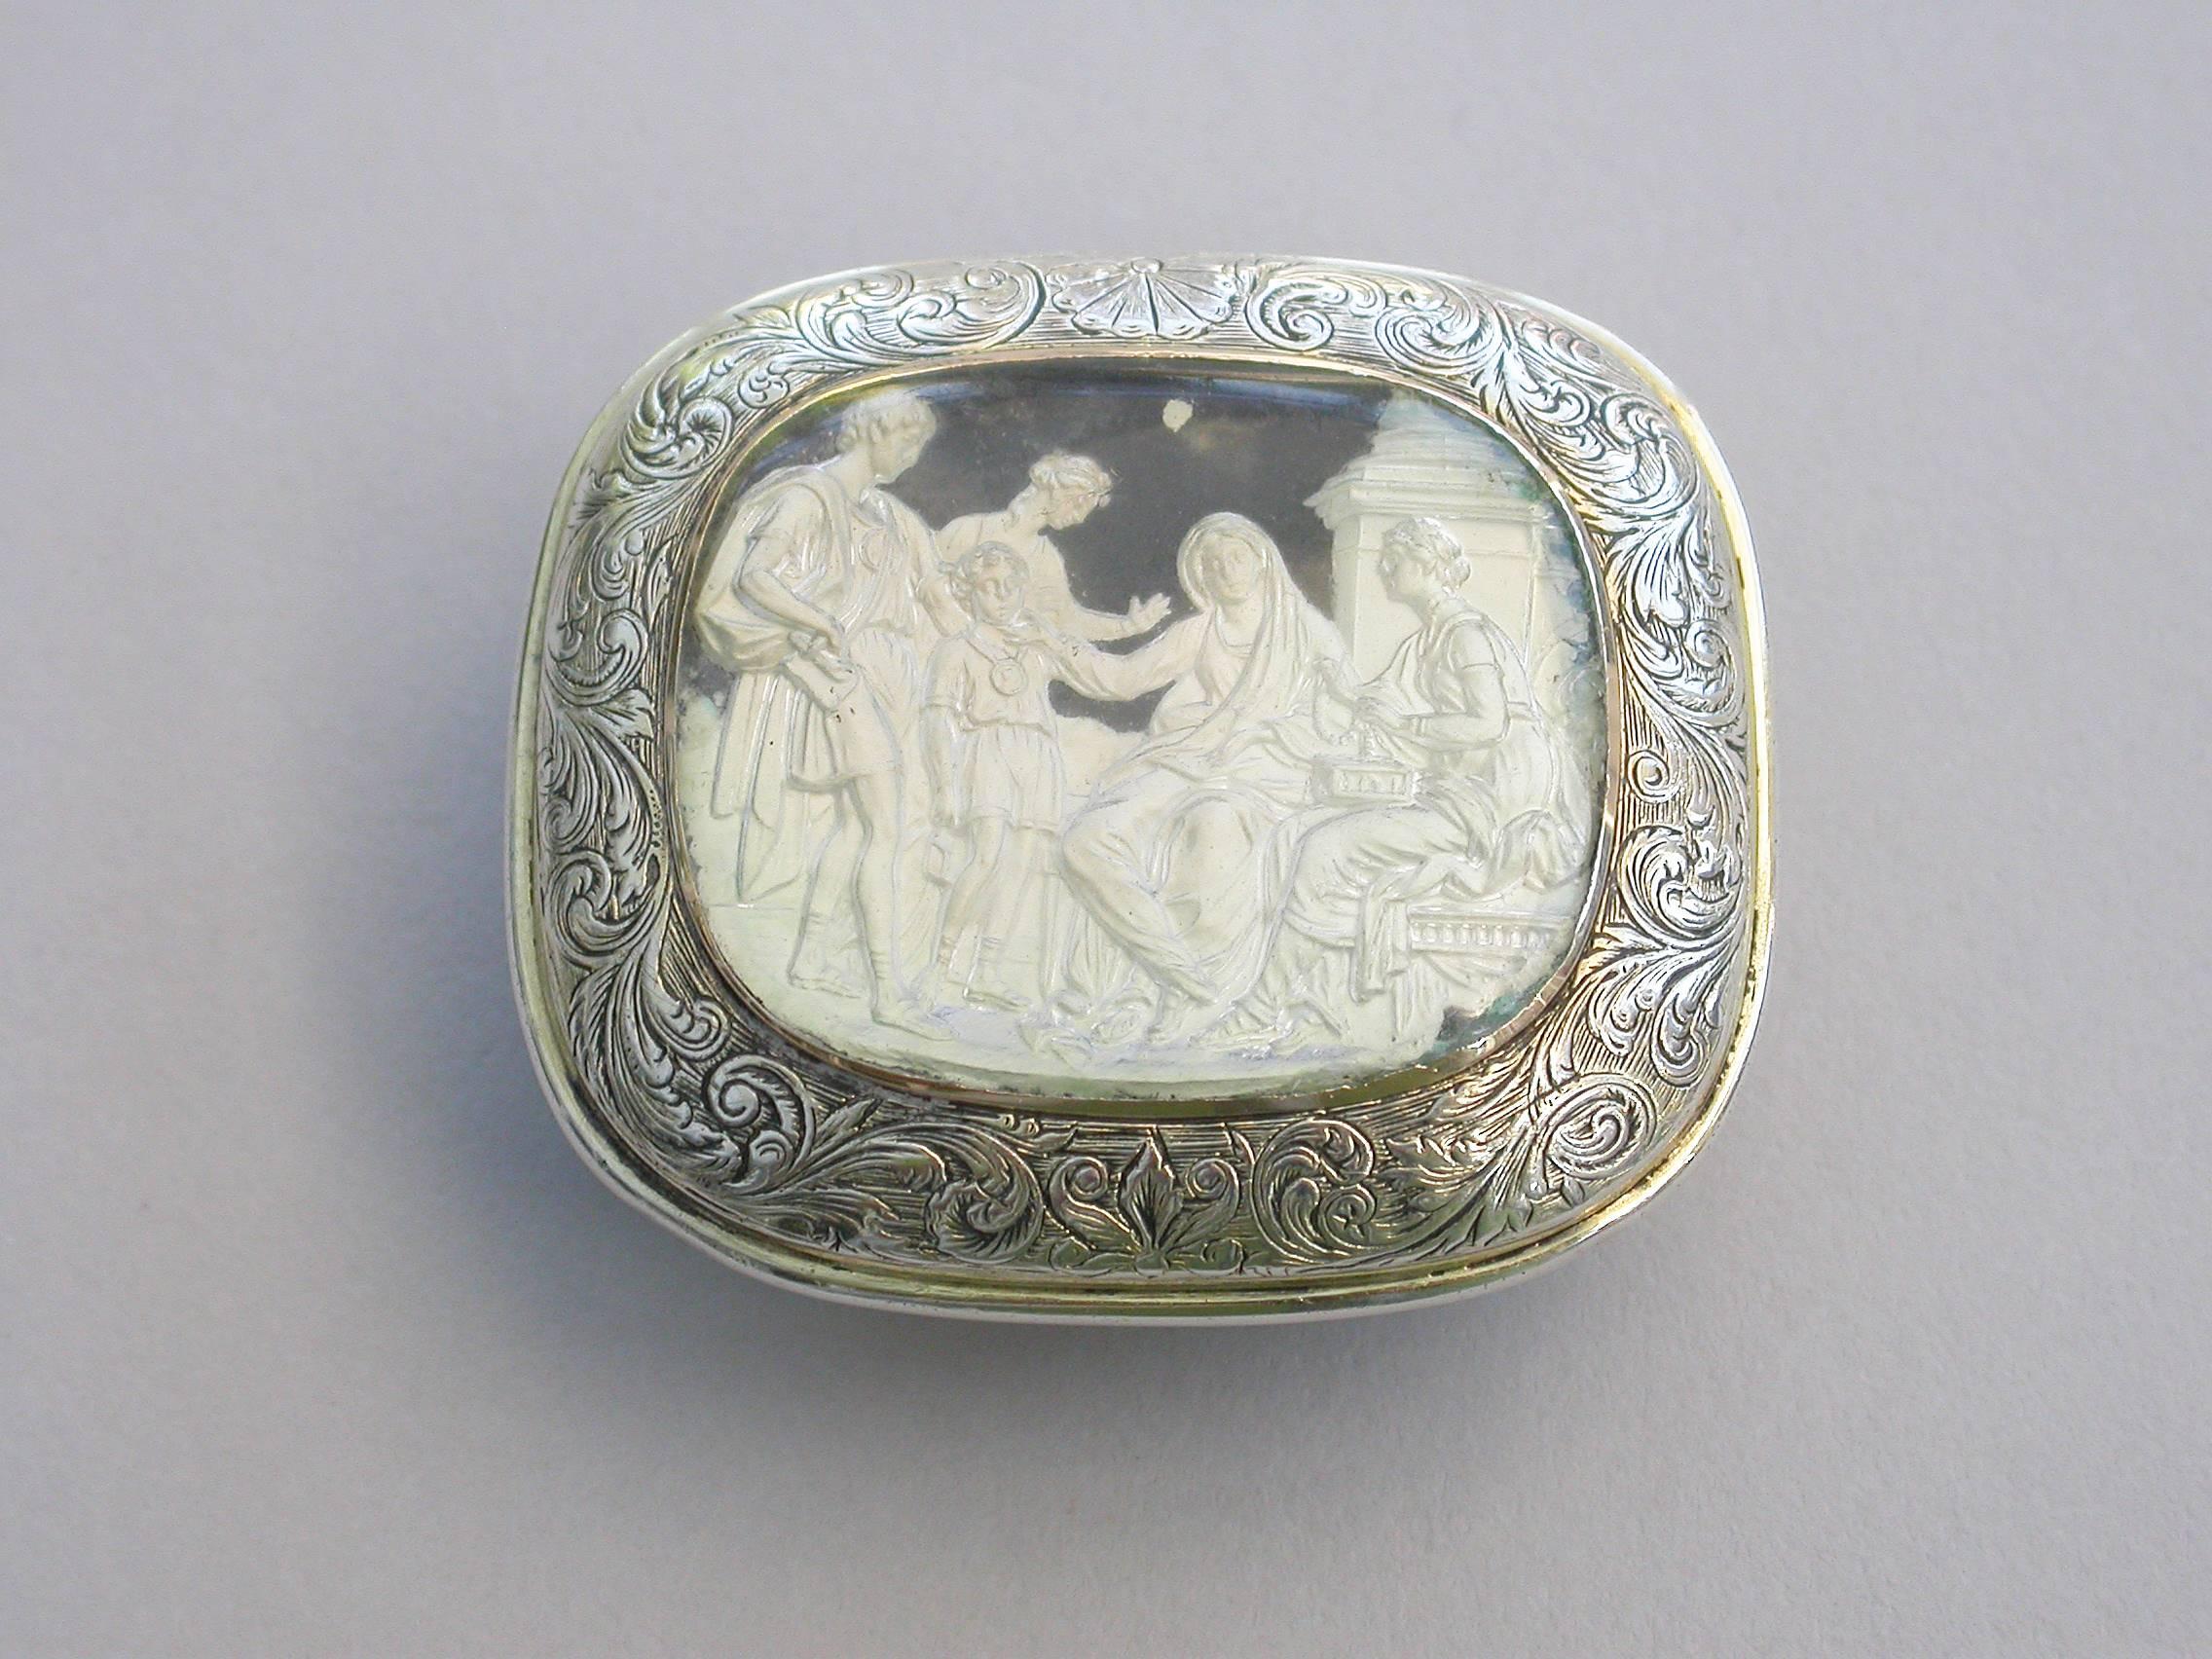 A superb and rare William IV cushion shaped silver vinaigrette with pale gilding, the lid set with a classical Roman scene in white slip under a domed crystal cover depicting; “Cornelia, Mother of the Gracchi”, framed by engraved feather scrolls